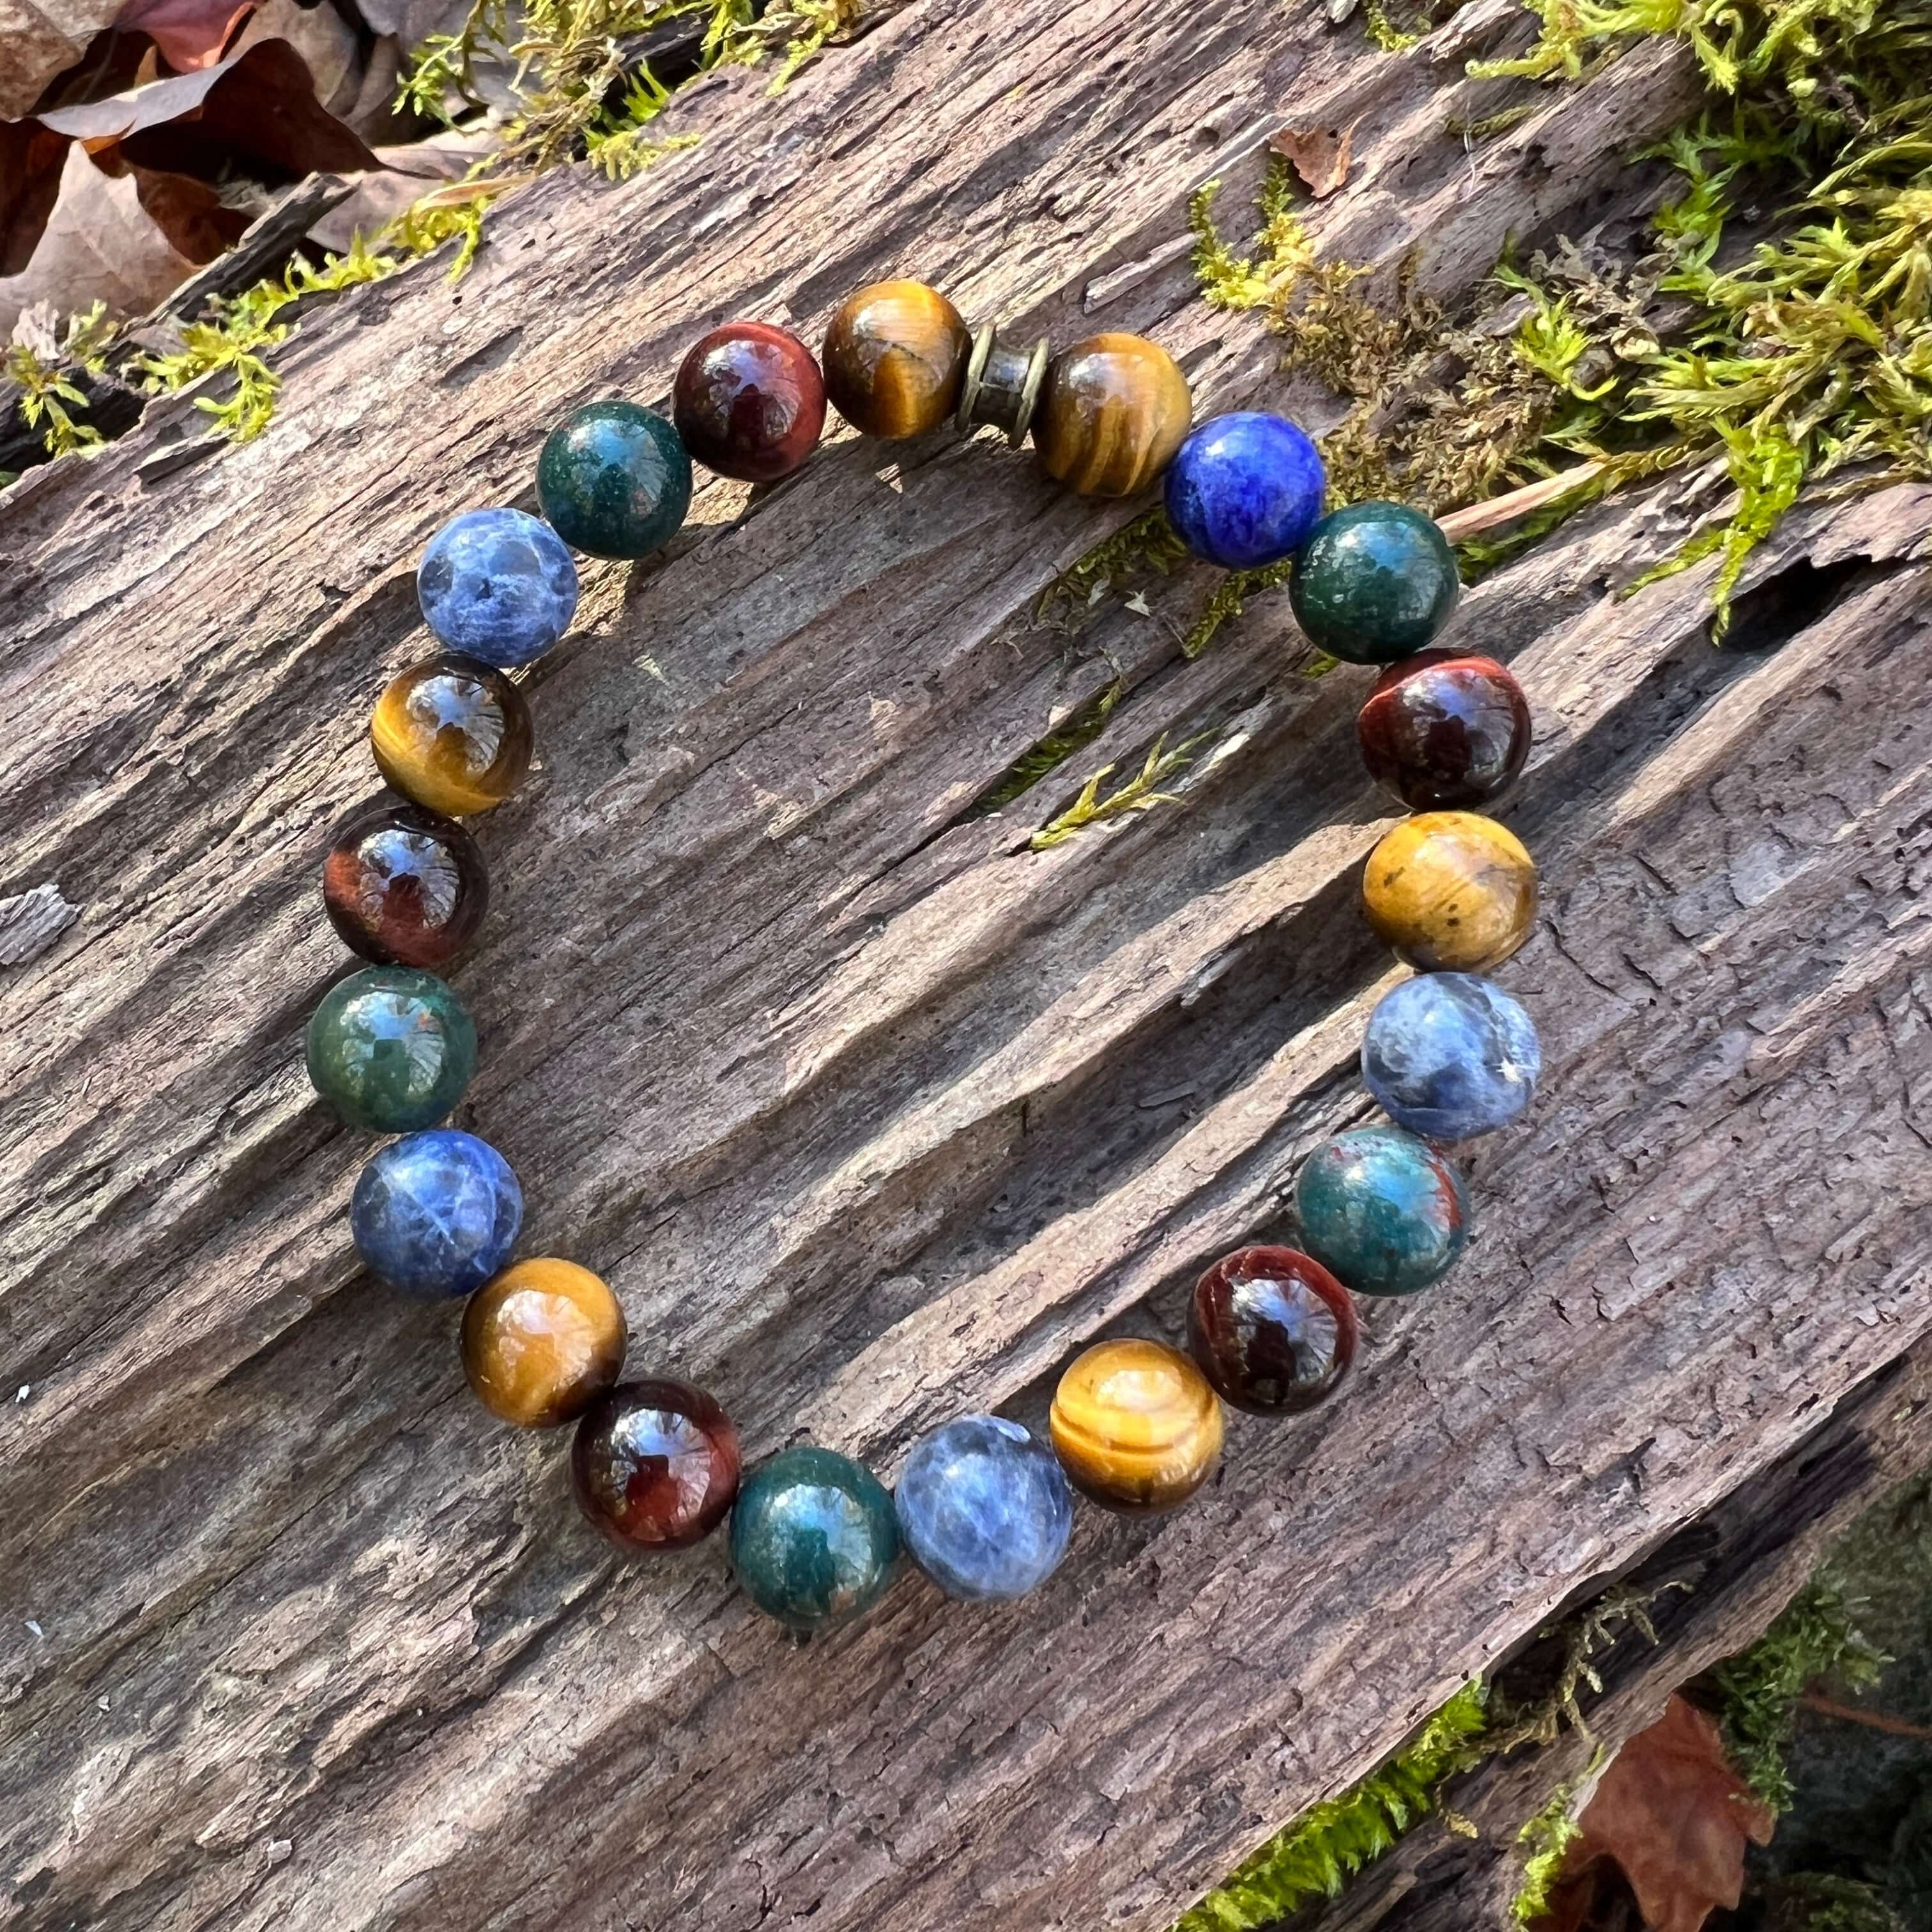 Deep Woods Bracelet This bracelet is made with two types of Tiger Eye stones, along with Bloodstone and Sodalite. Brought together, this creates a very rooted and grounded energy, allowing the wearer to be clear minded, as well as feeling very secure and